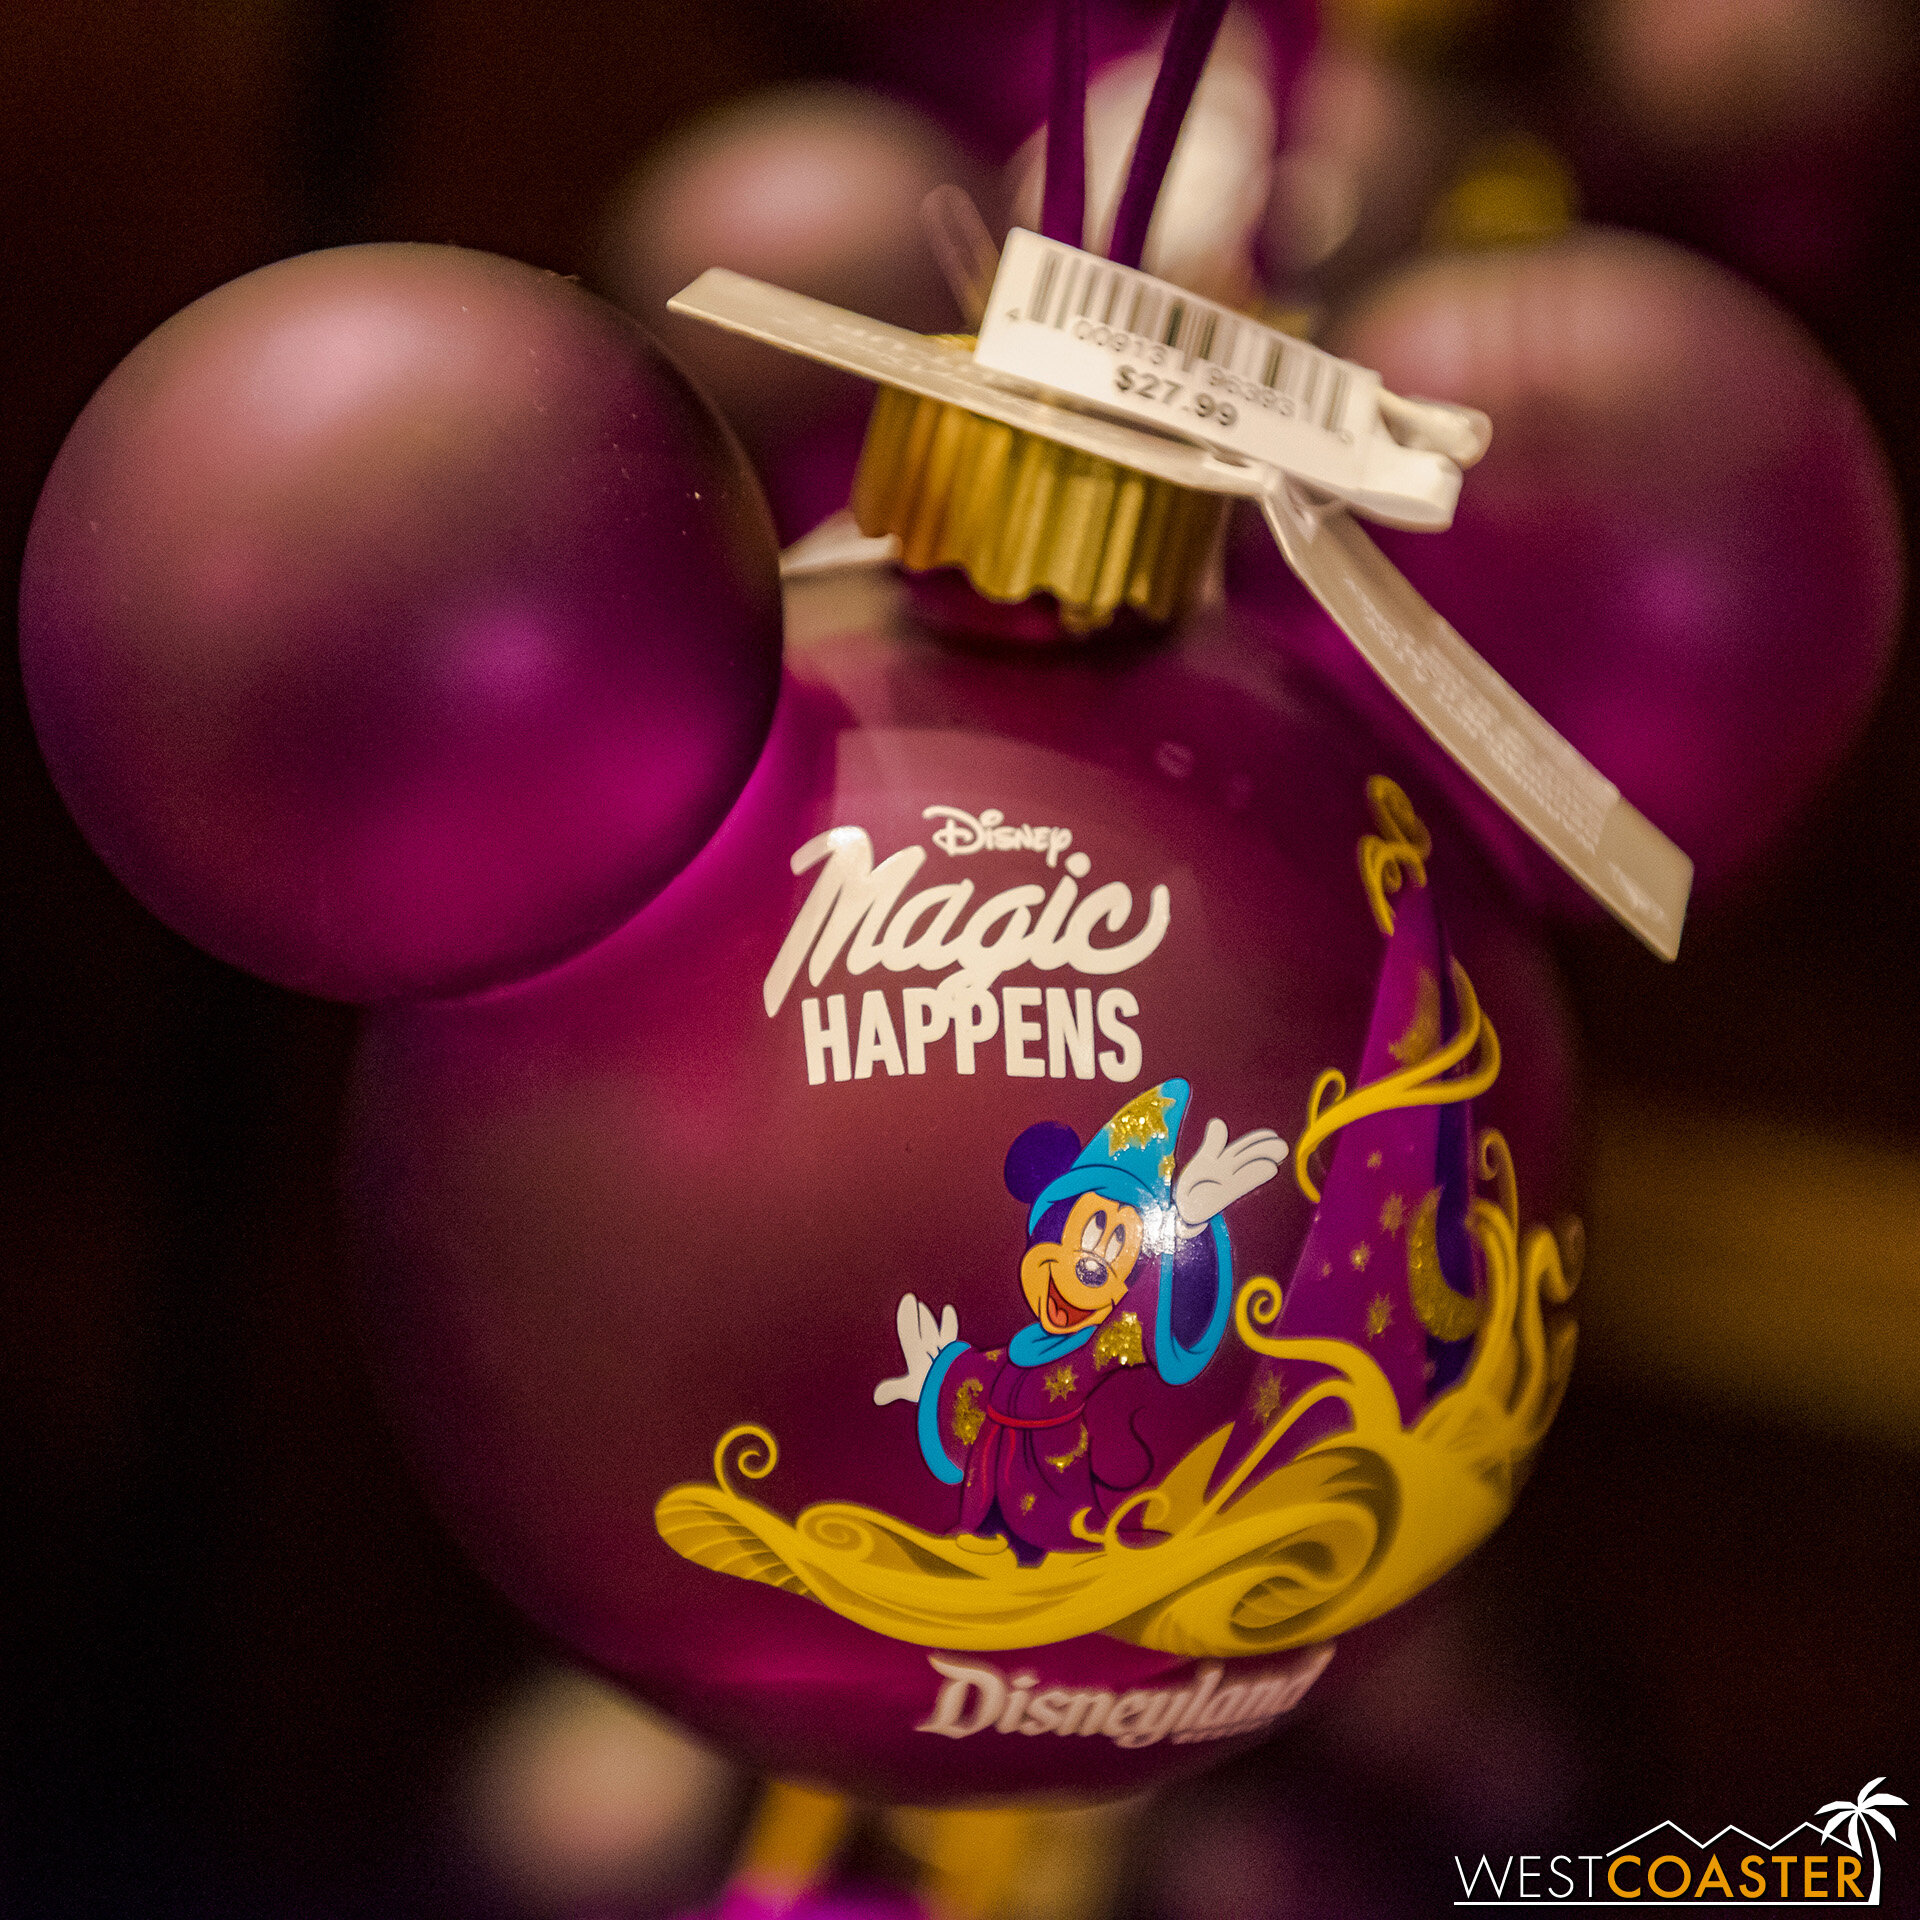  Want a Mickey ornament for Magic Happens?  It’s kind of pricey! 